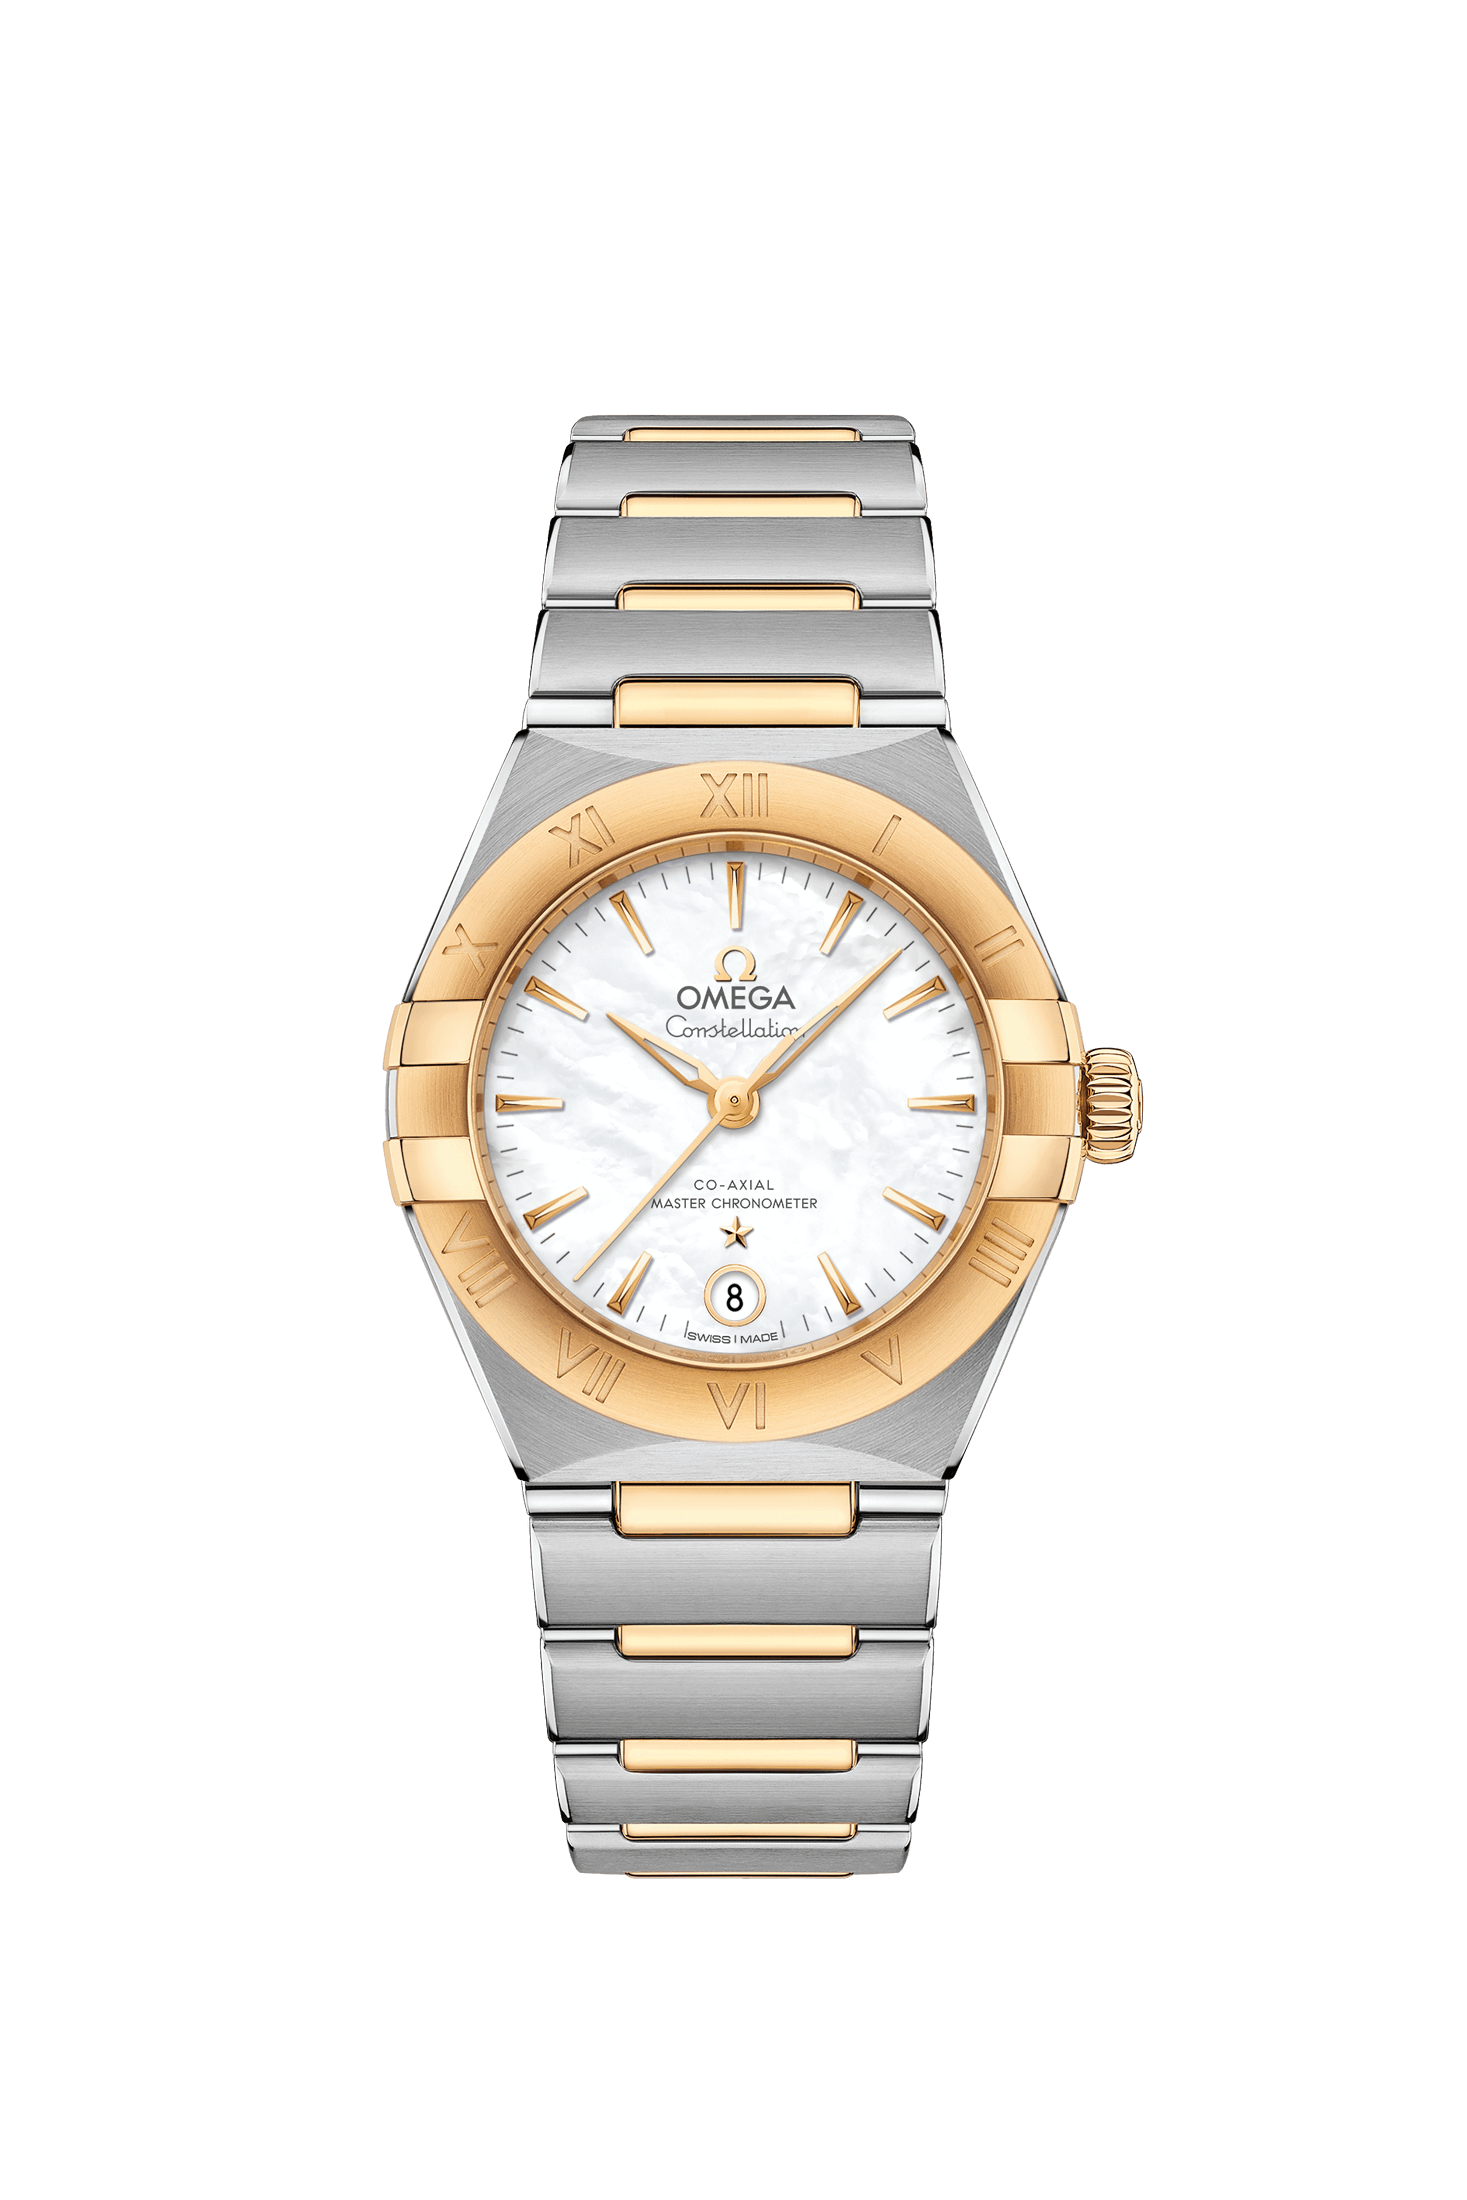 Ladies' watch  OMEGA, Constellation Co Axial Master Chronometer / 29mm, SKU: 131.20.29.20.05.002 | watchapproach.com